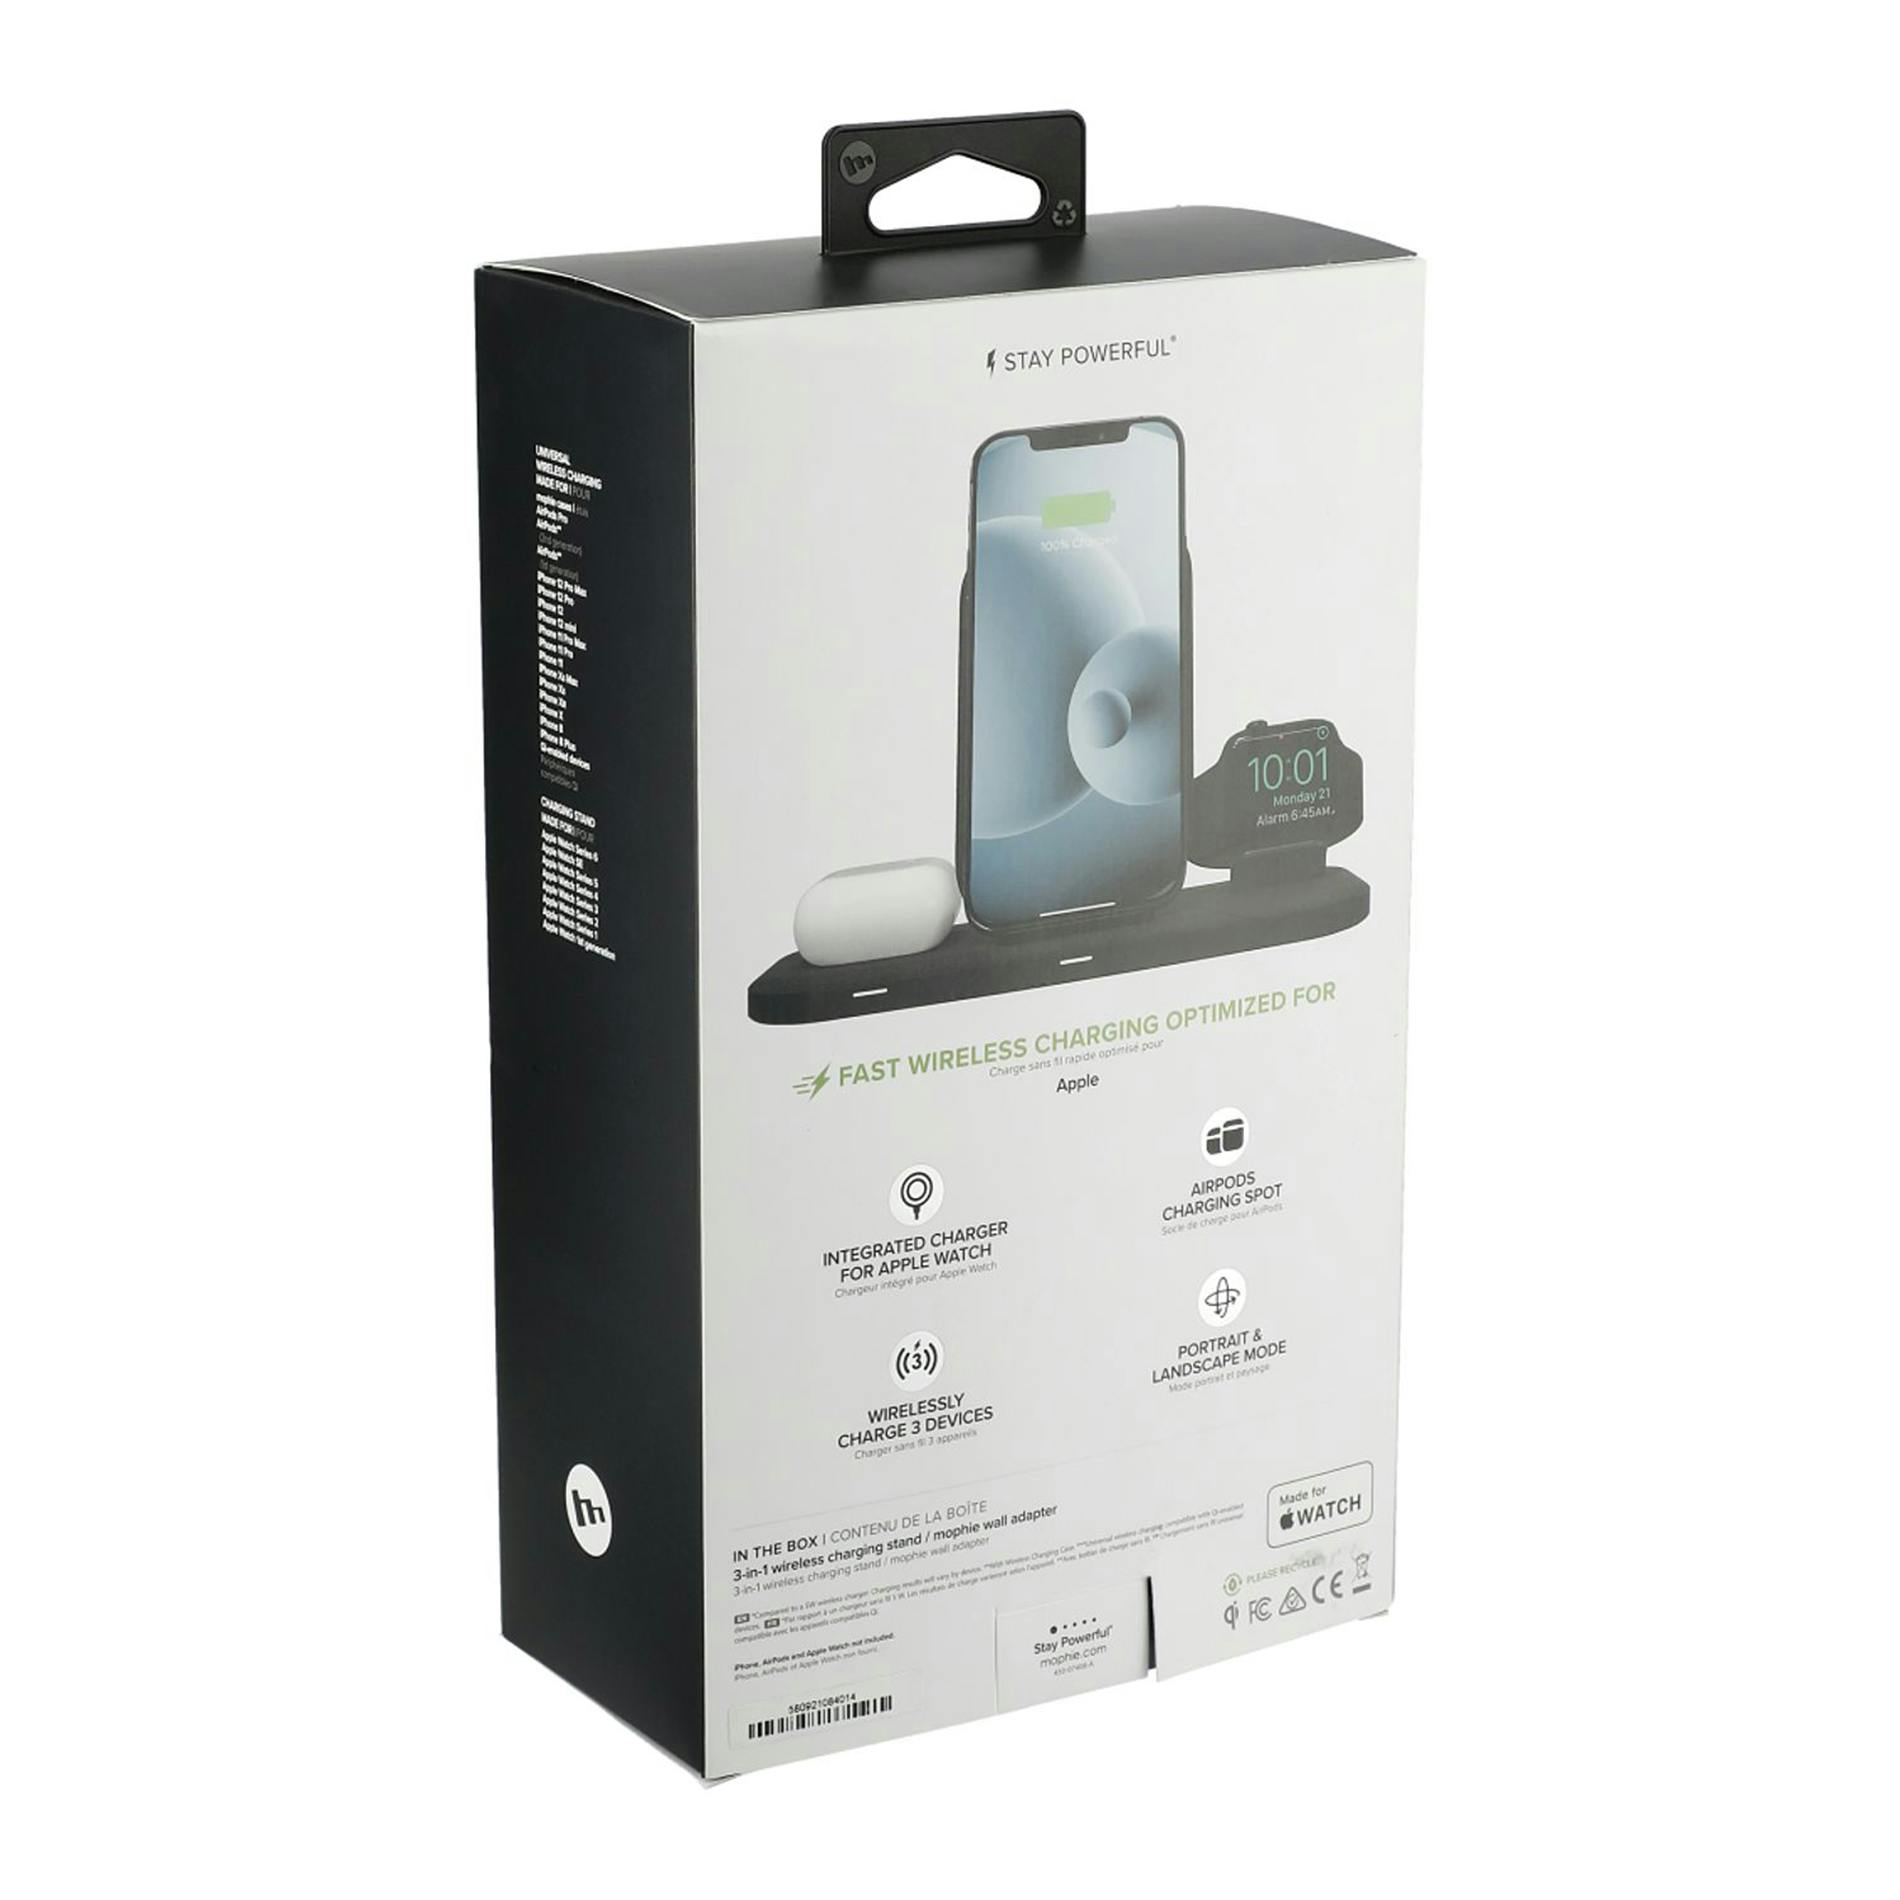 mophie® 3-in-1 Wireless Charging Stand - additional Image 2